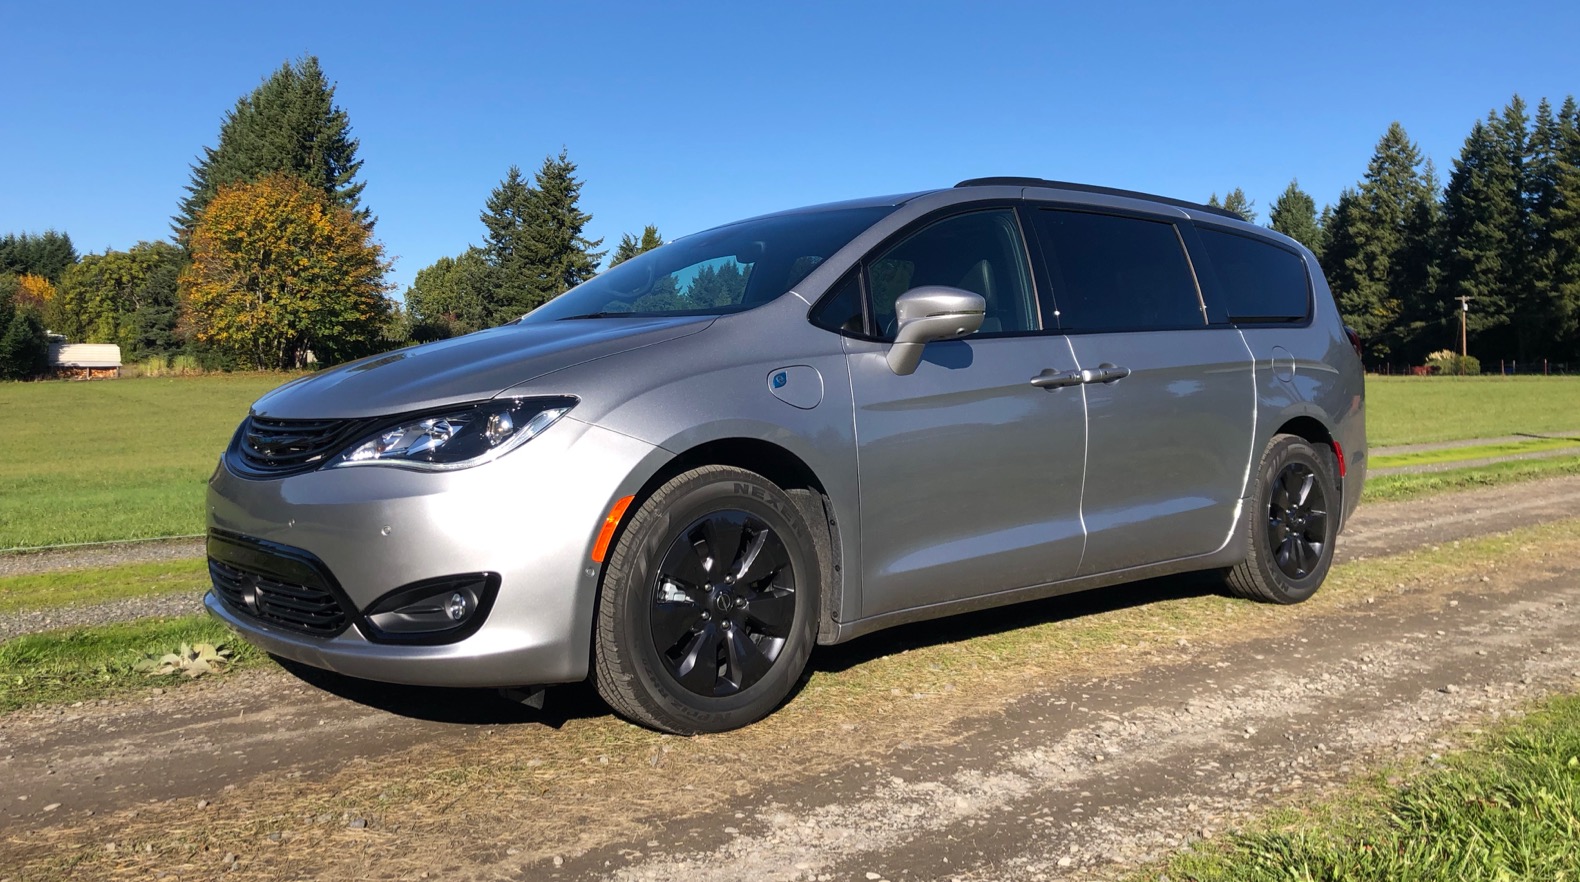 2020 Chrysler Pacifica Hybrid Review: Simply the Best - The Torque Report